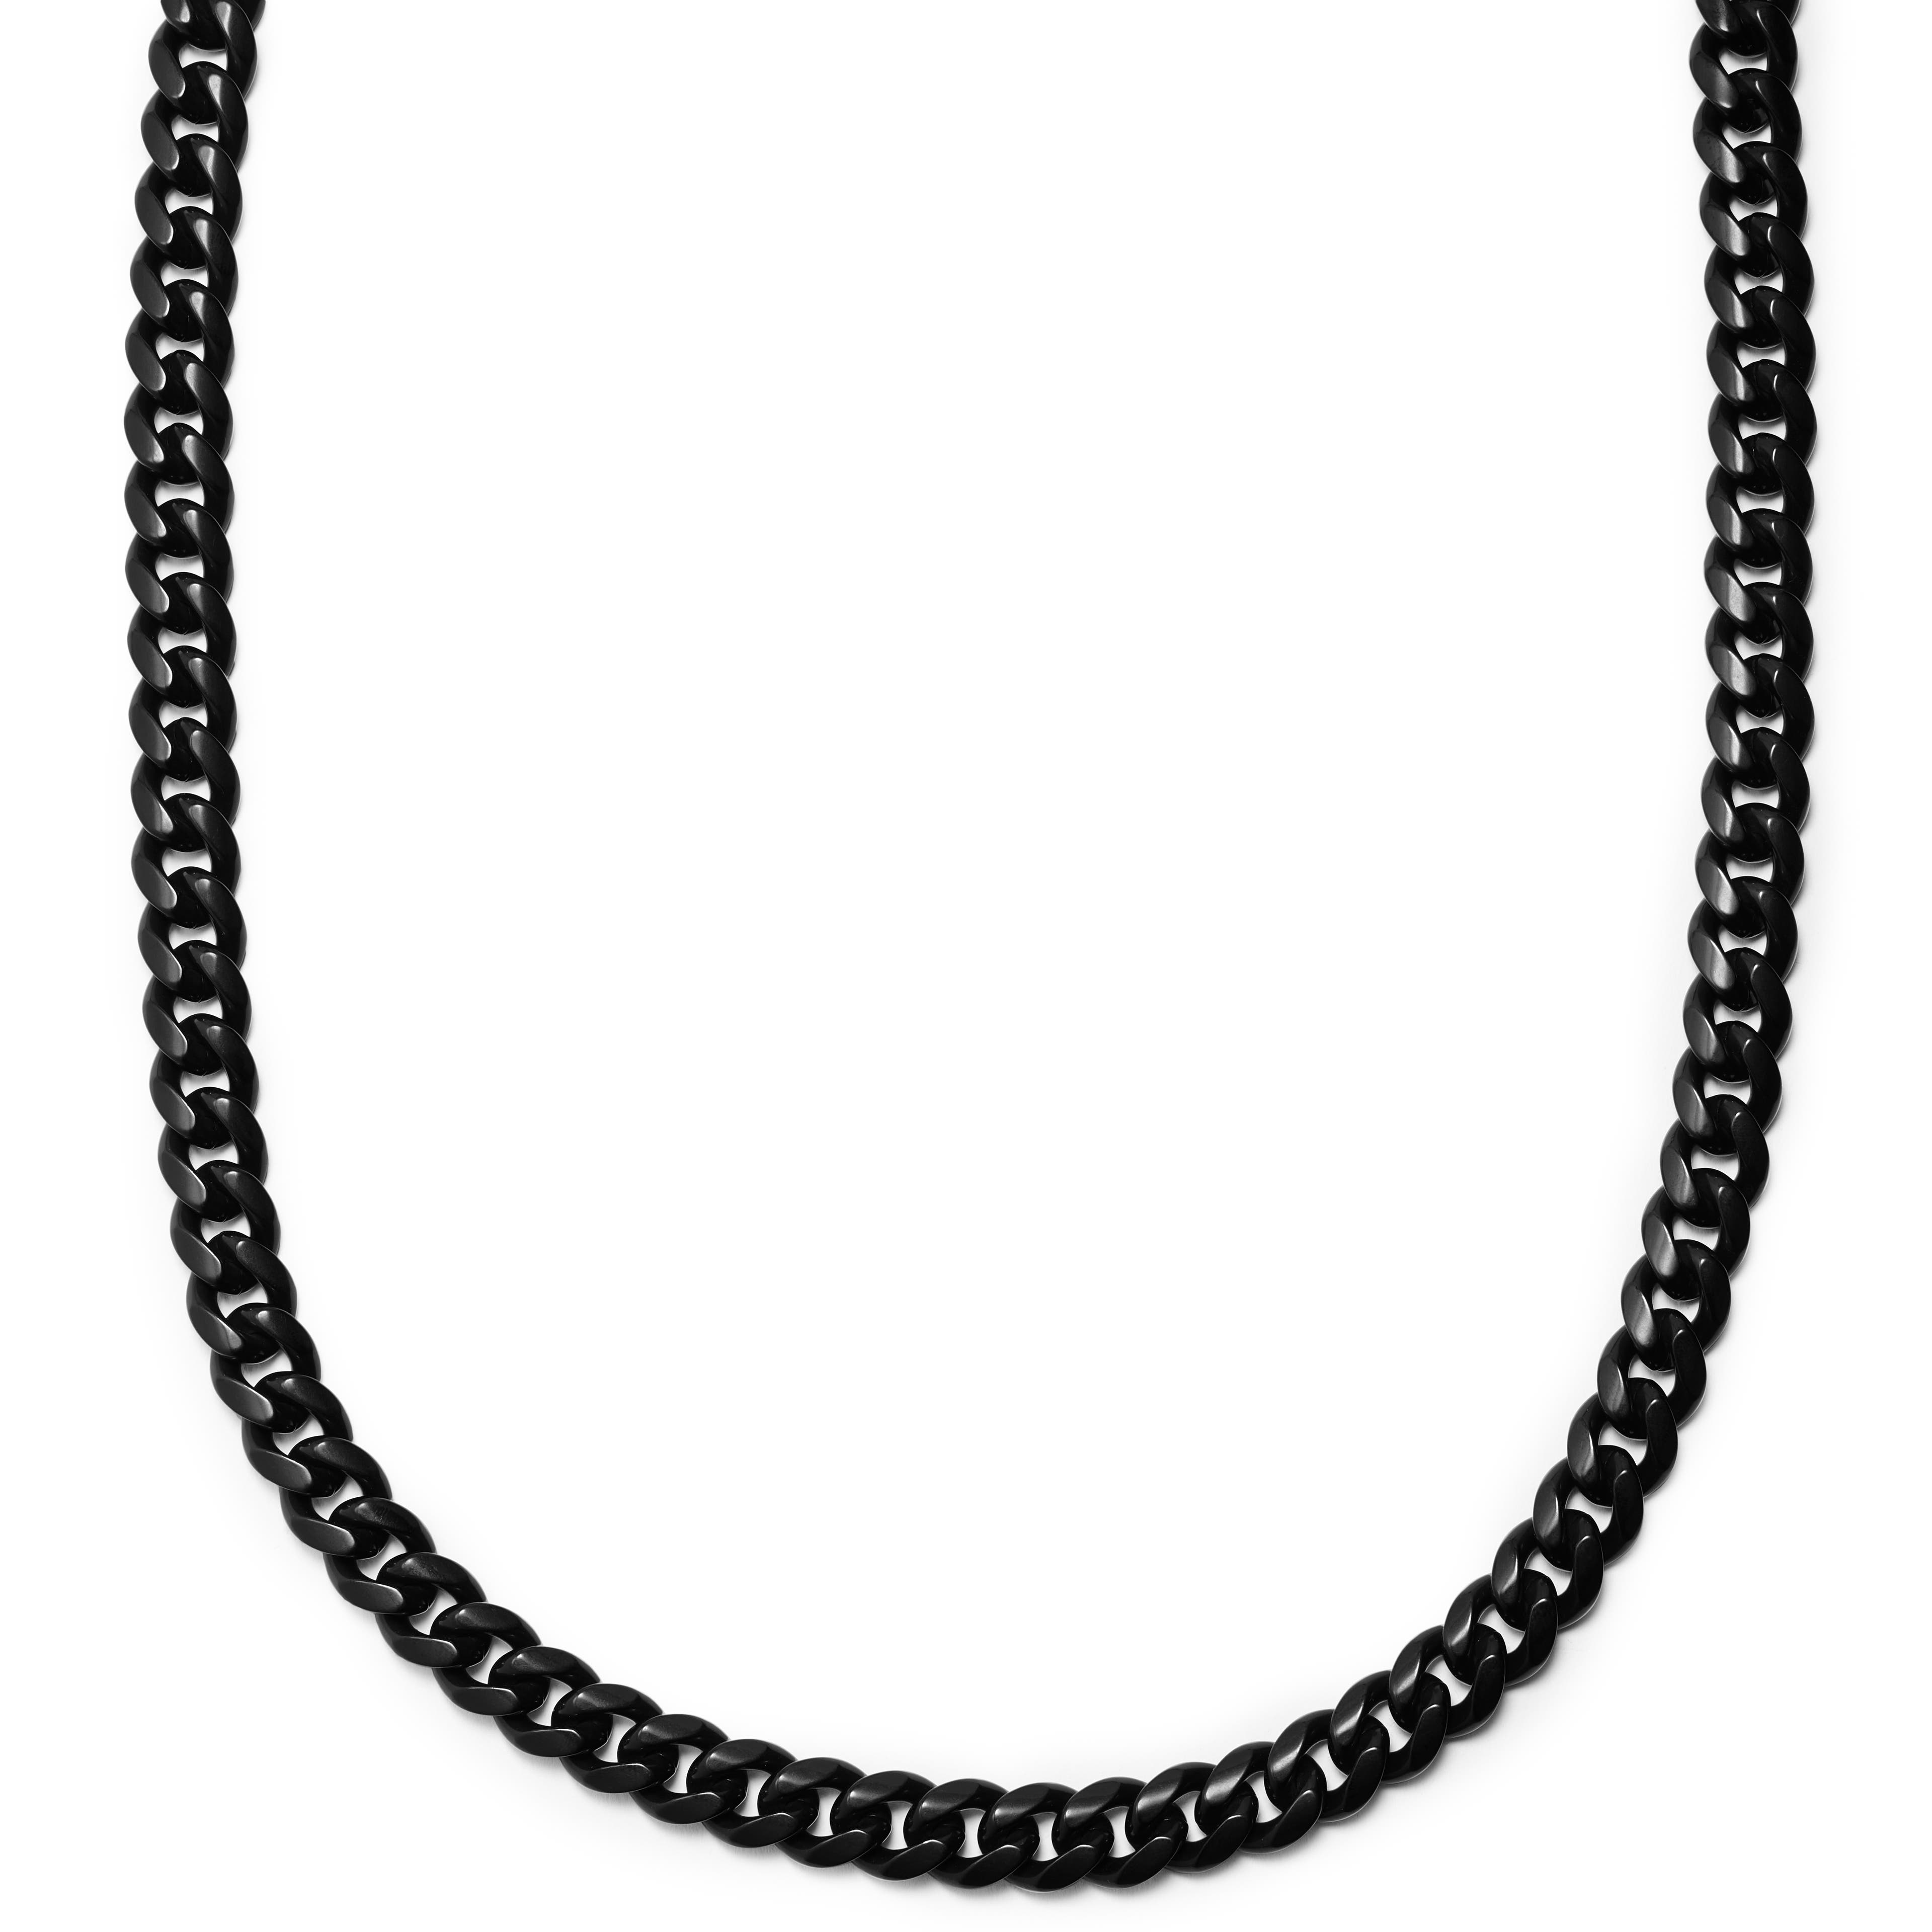 12 mm Black Stainless Steel Cuban Chain Necklace